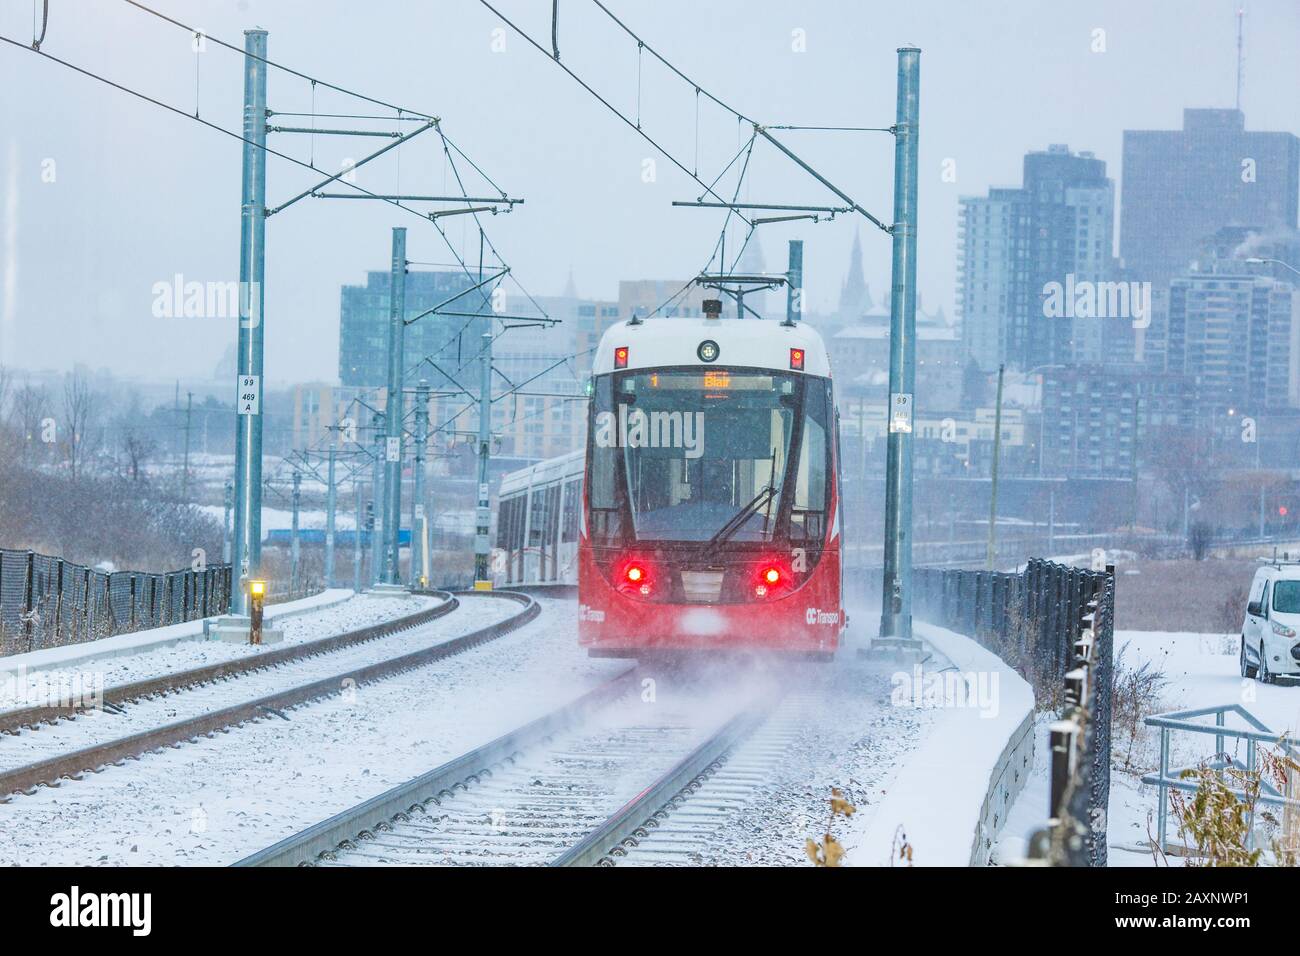 Ottawa's Light Rail stations and trains, in action, during the winter. Stock Photo